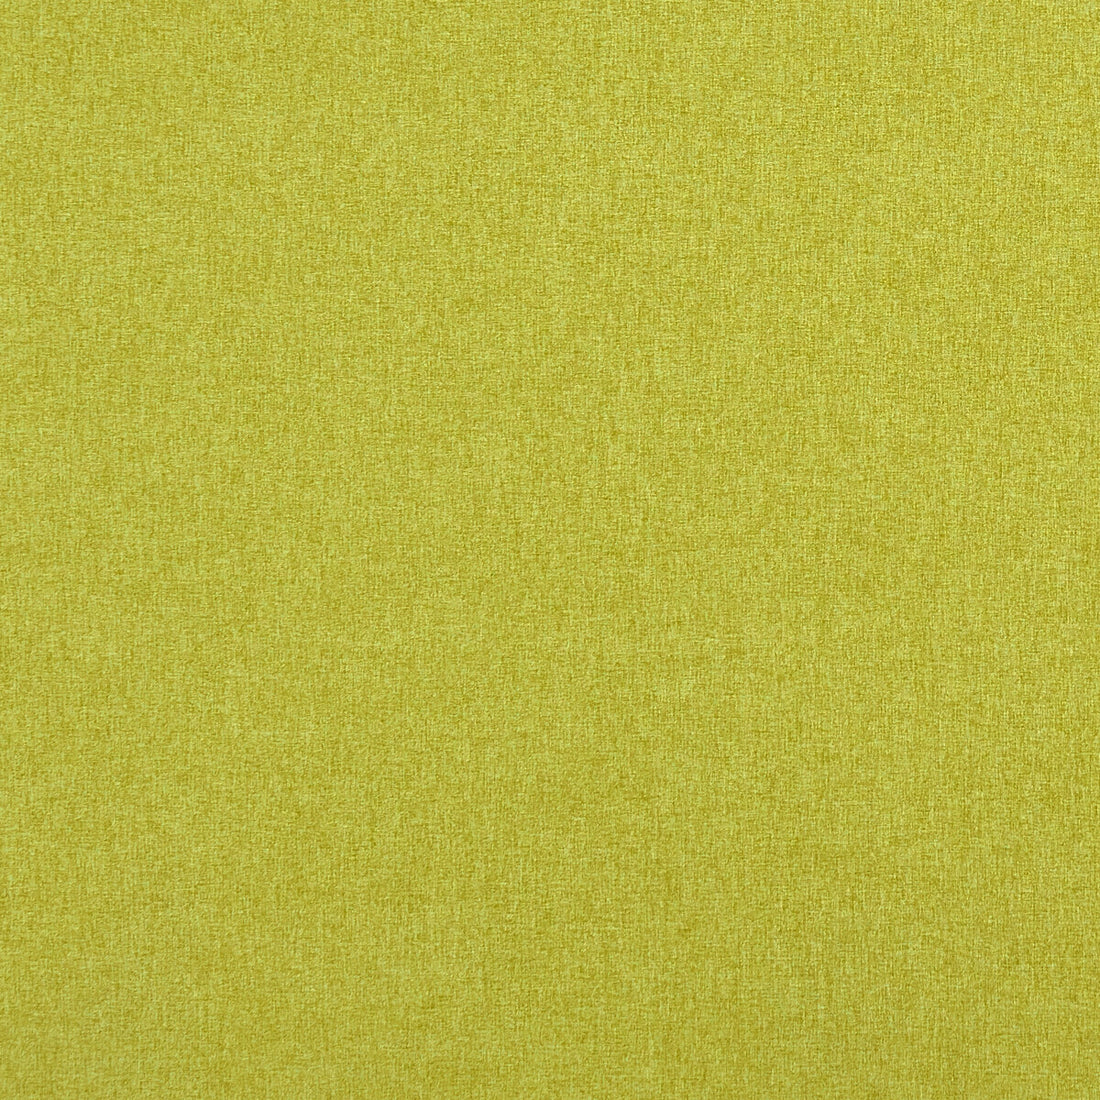 Highlander fabric in chartreuse color - pattern F0848/35.CAC.0 - by Clarke And Clarke in the Clarke &amp; Clarke Highlander 2 collection